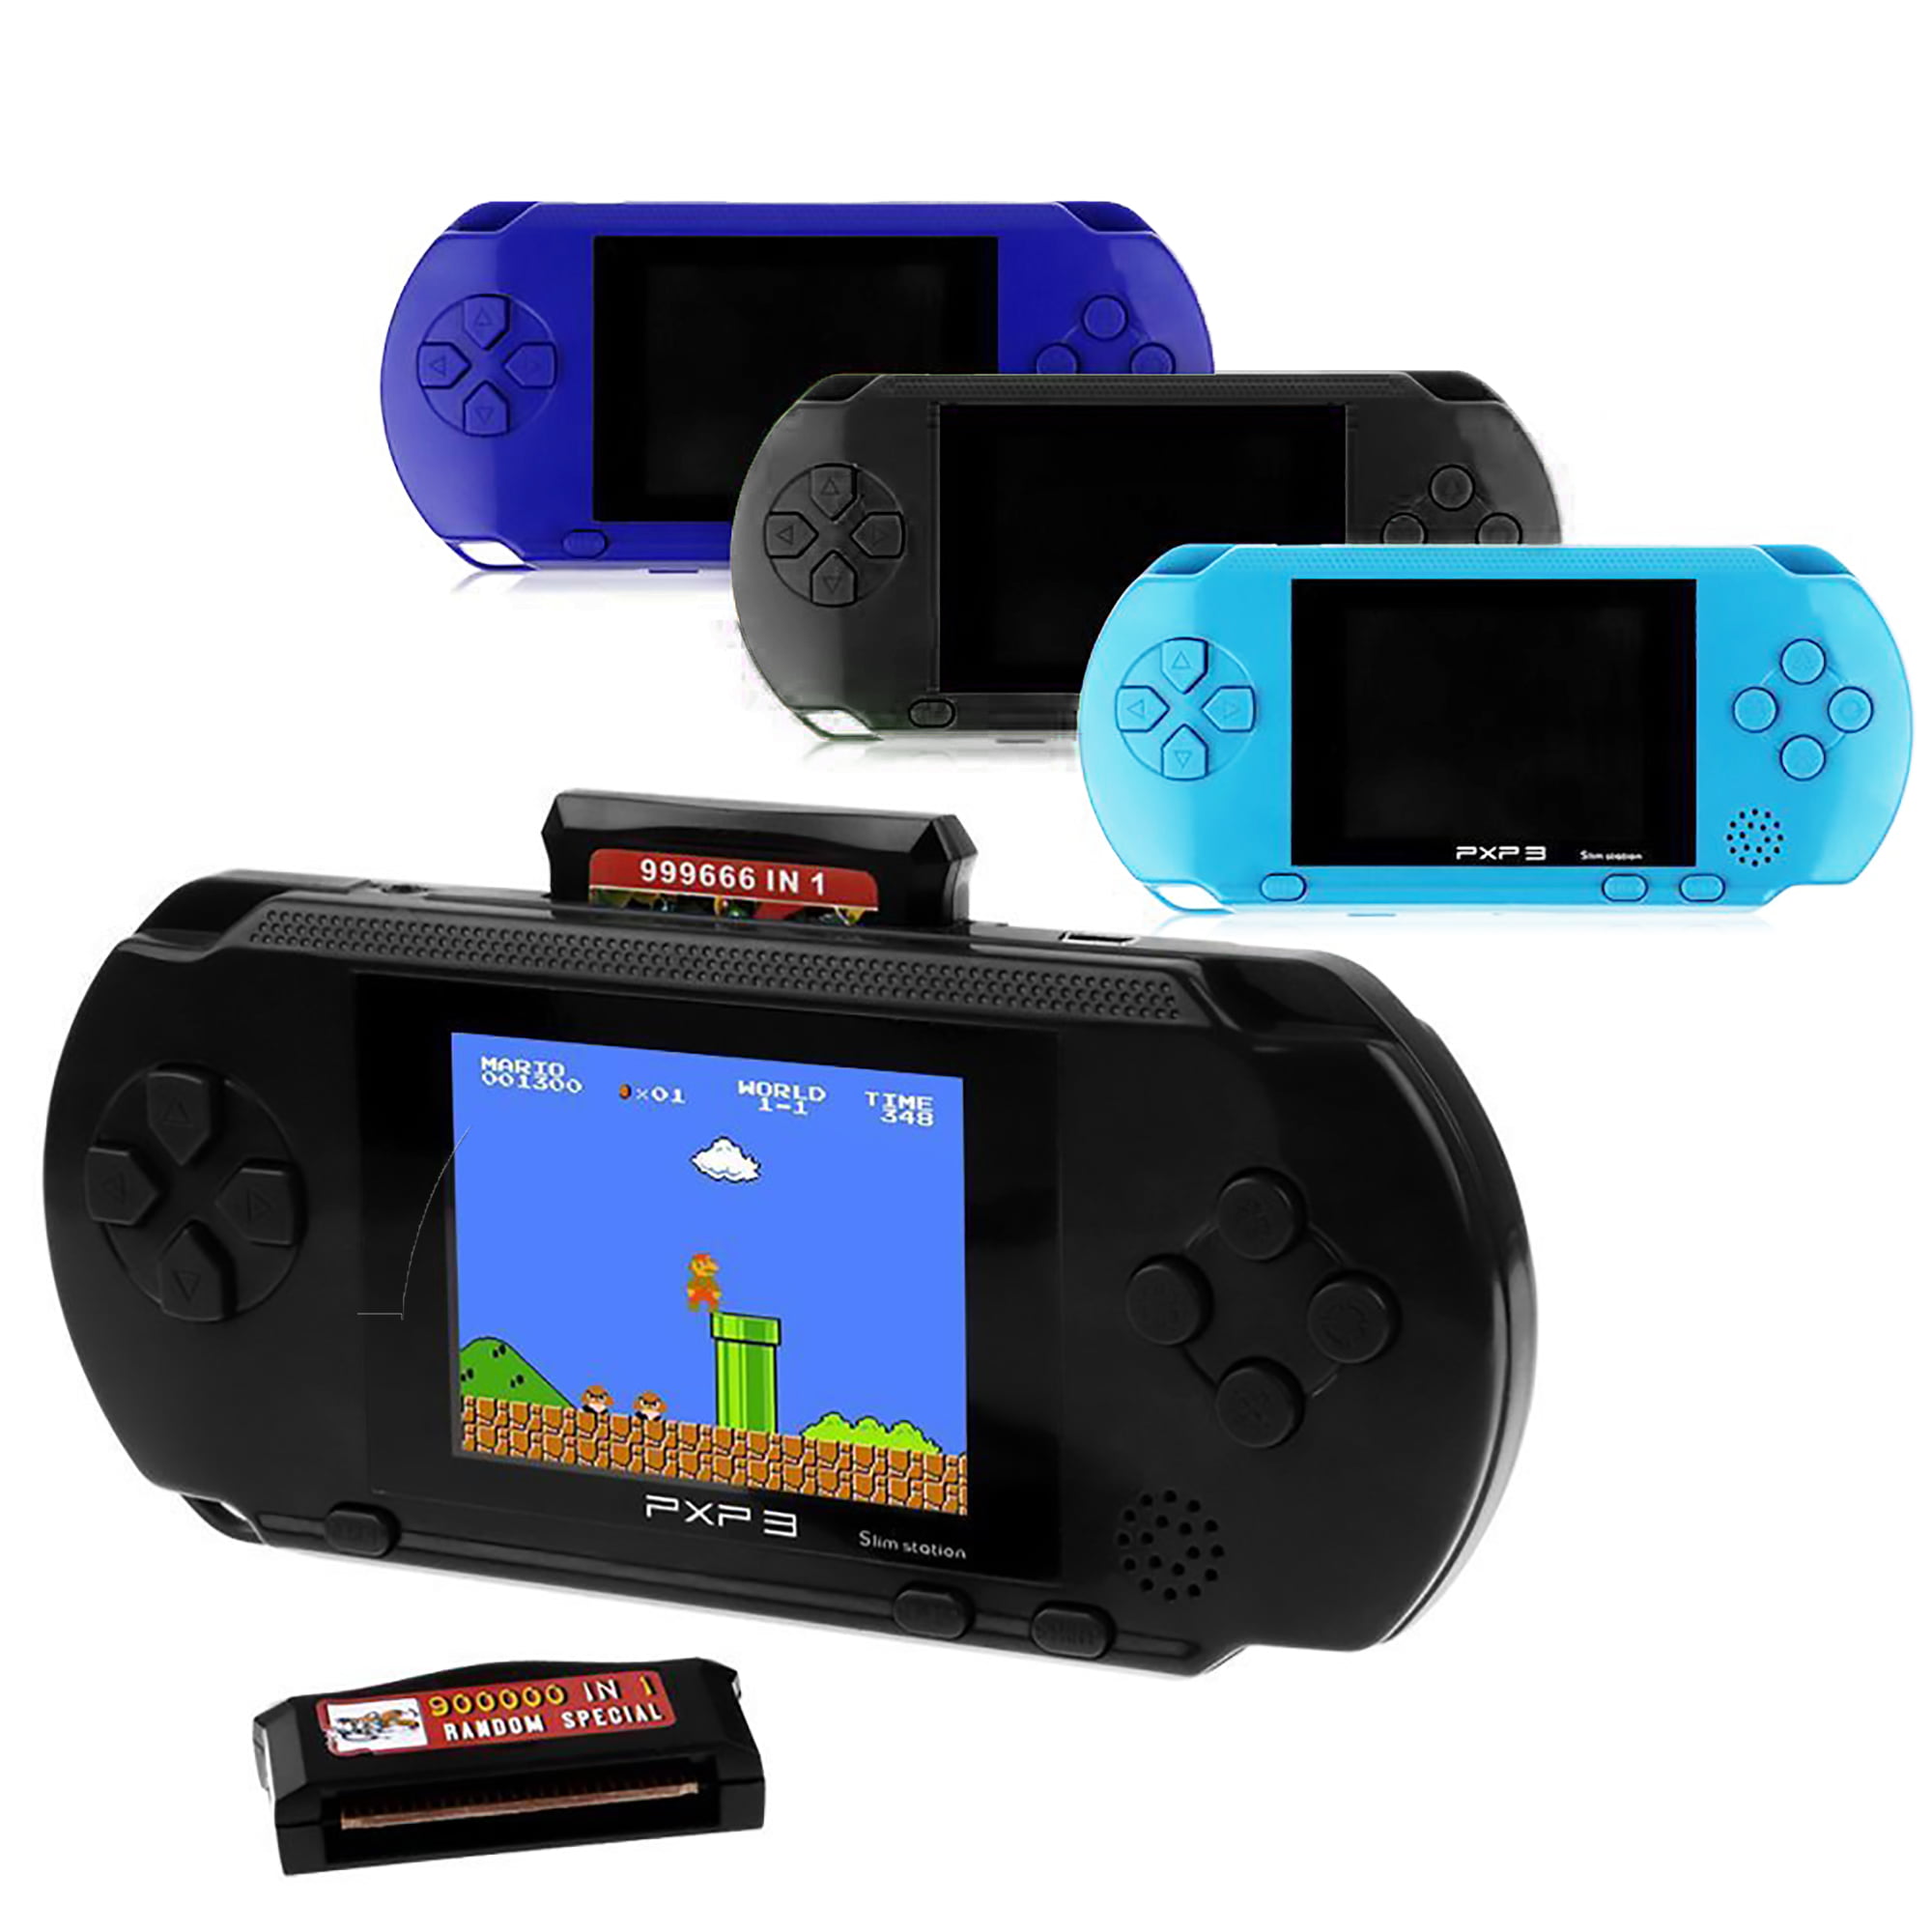 Buy P.S.P. Game Player Android OS Portable Game Console Online @ ₹14811  from ShopClues